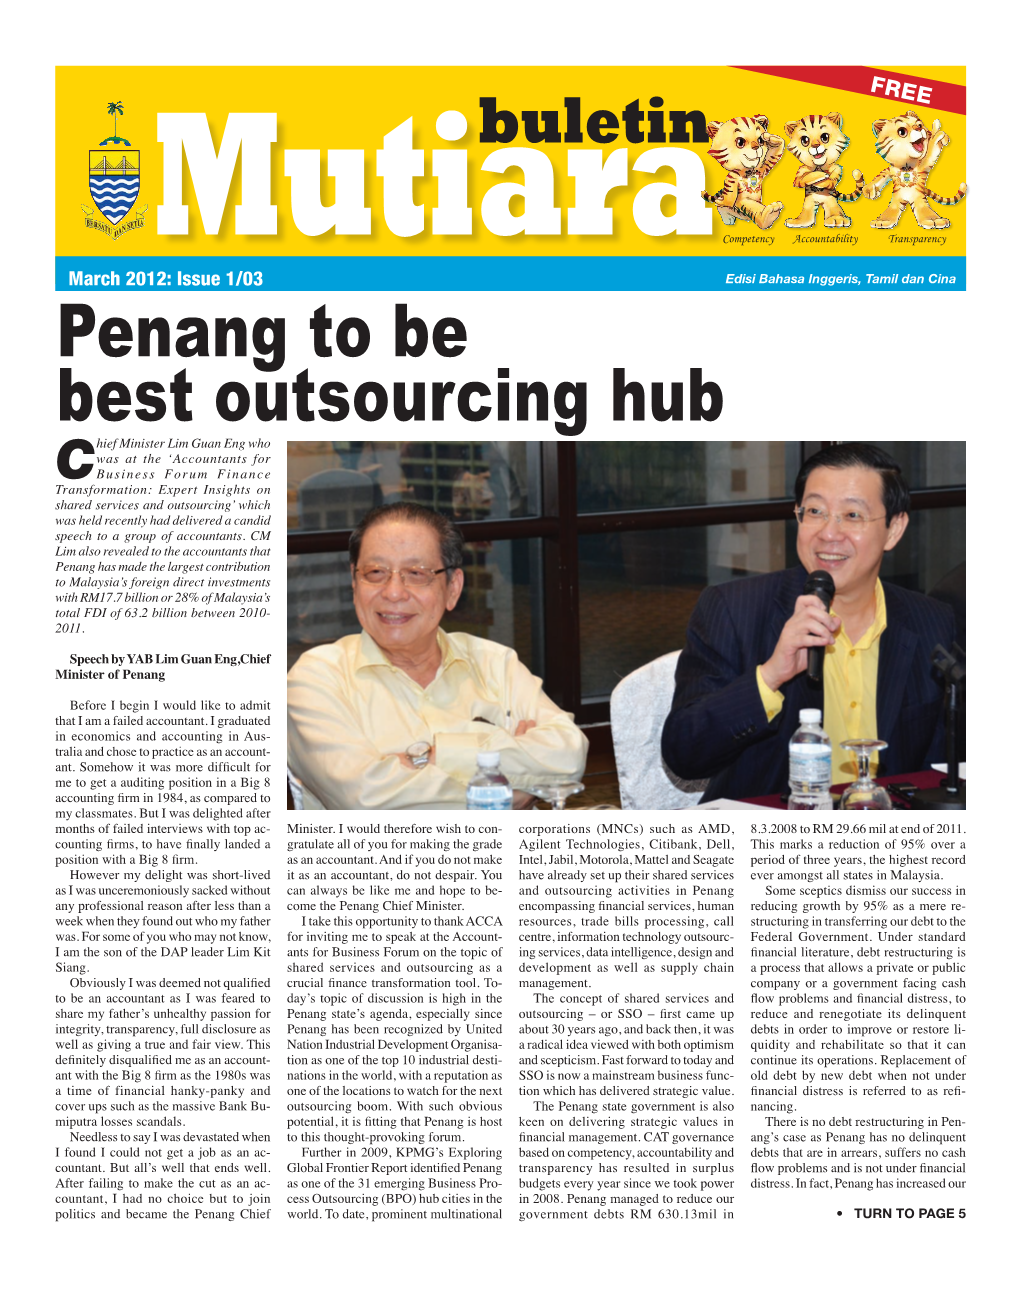 Penang to Be Best Outsourcing